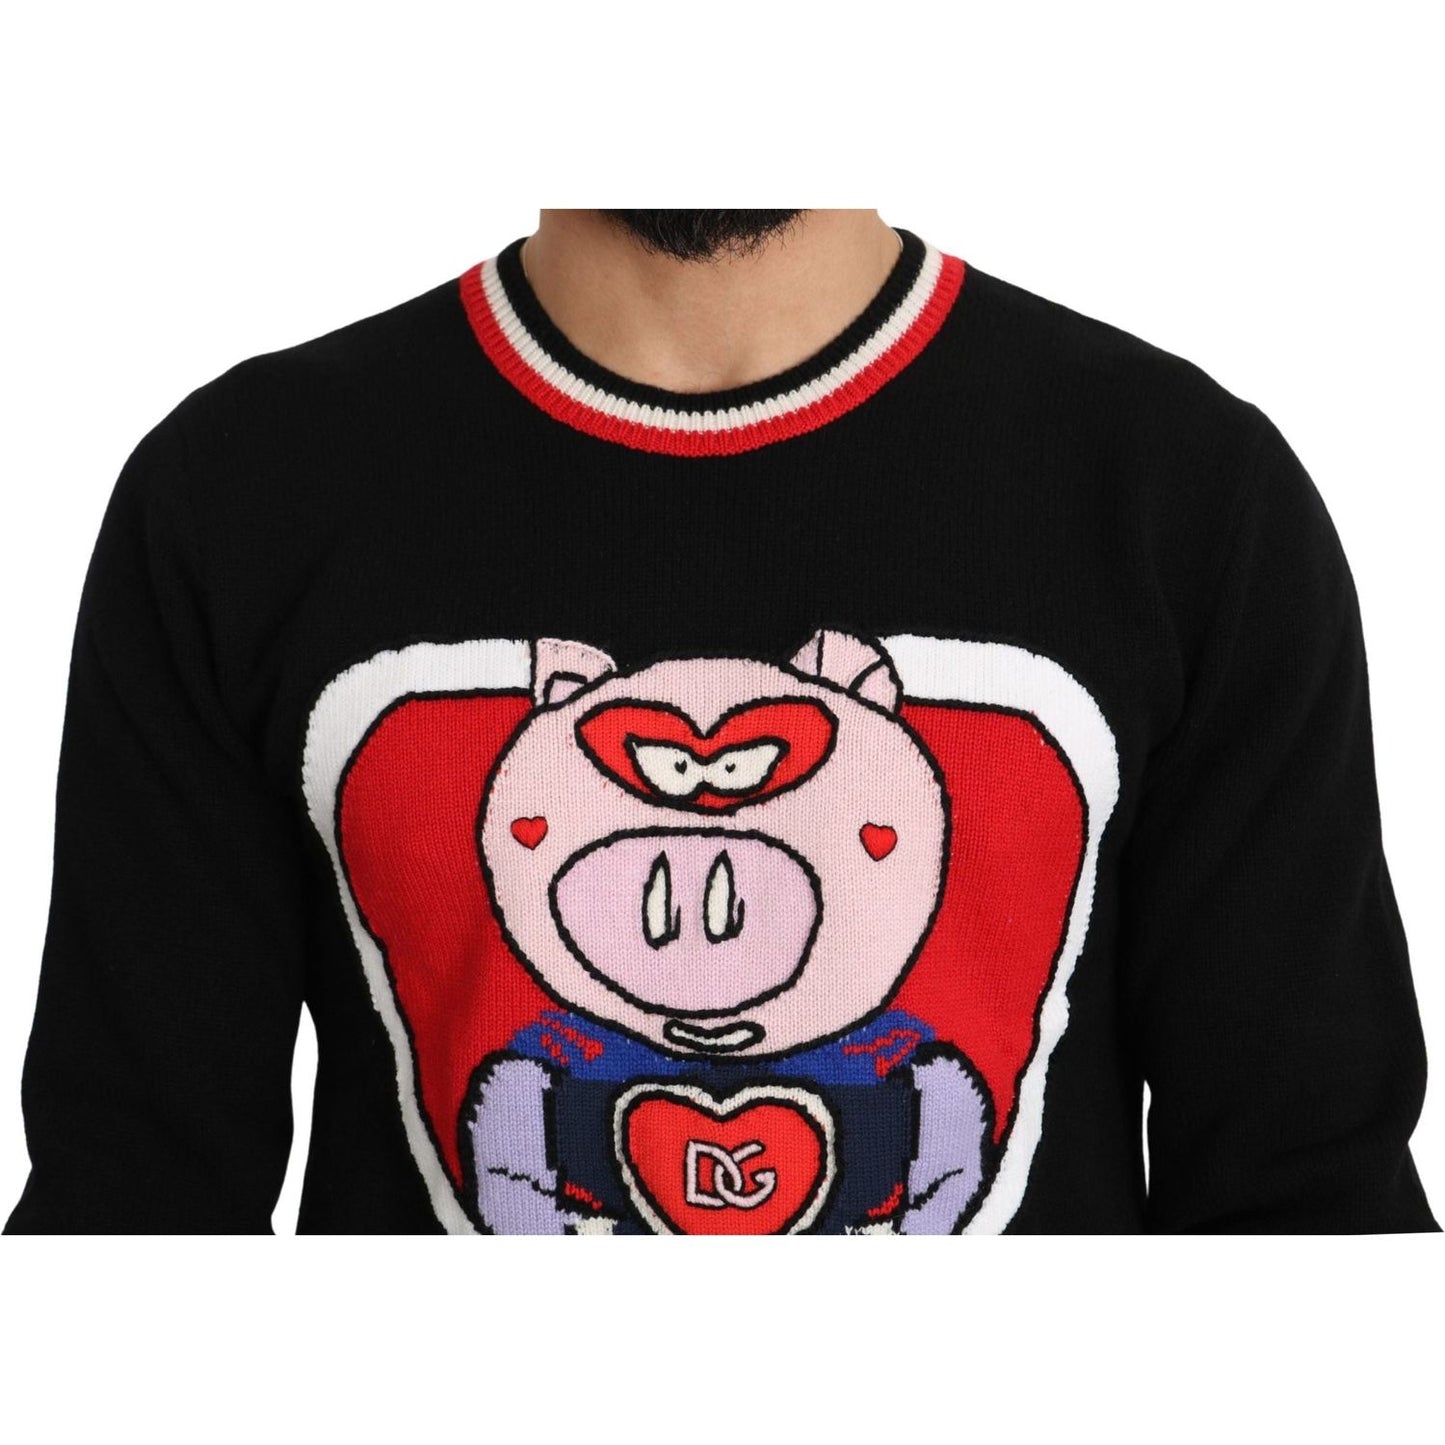 Dolce & Gabbana Elegant Black Cashmere Crew Neck Sweater black-cashmere-pig-of-the-year-pullover-sweater IMG_4384-scaled-67fbce44-1a9.jpg